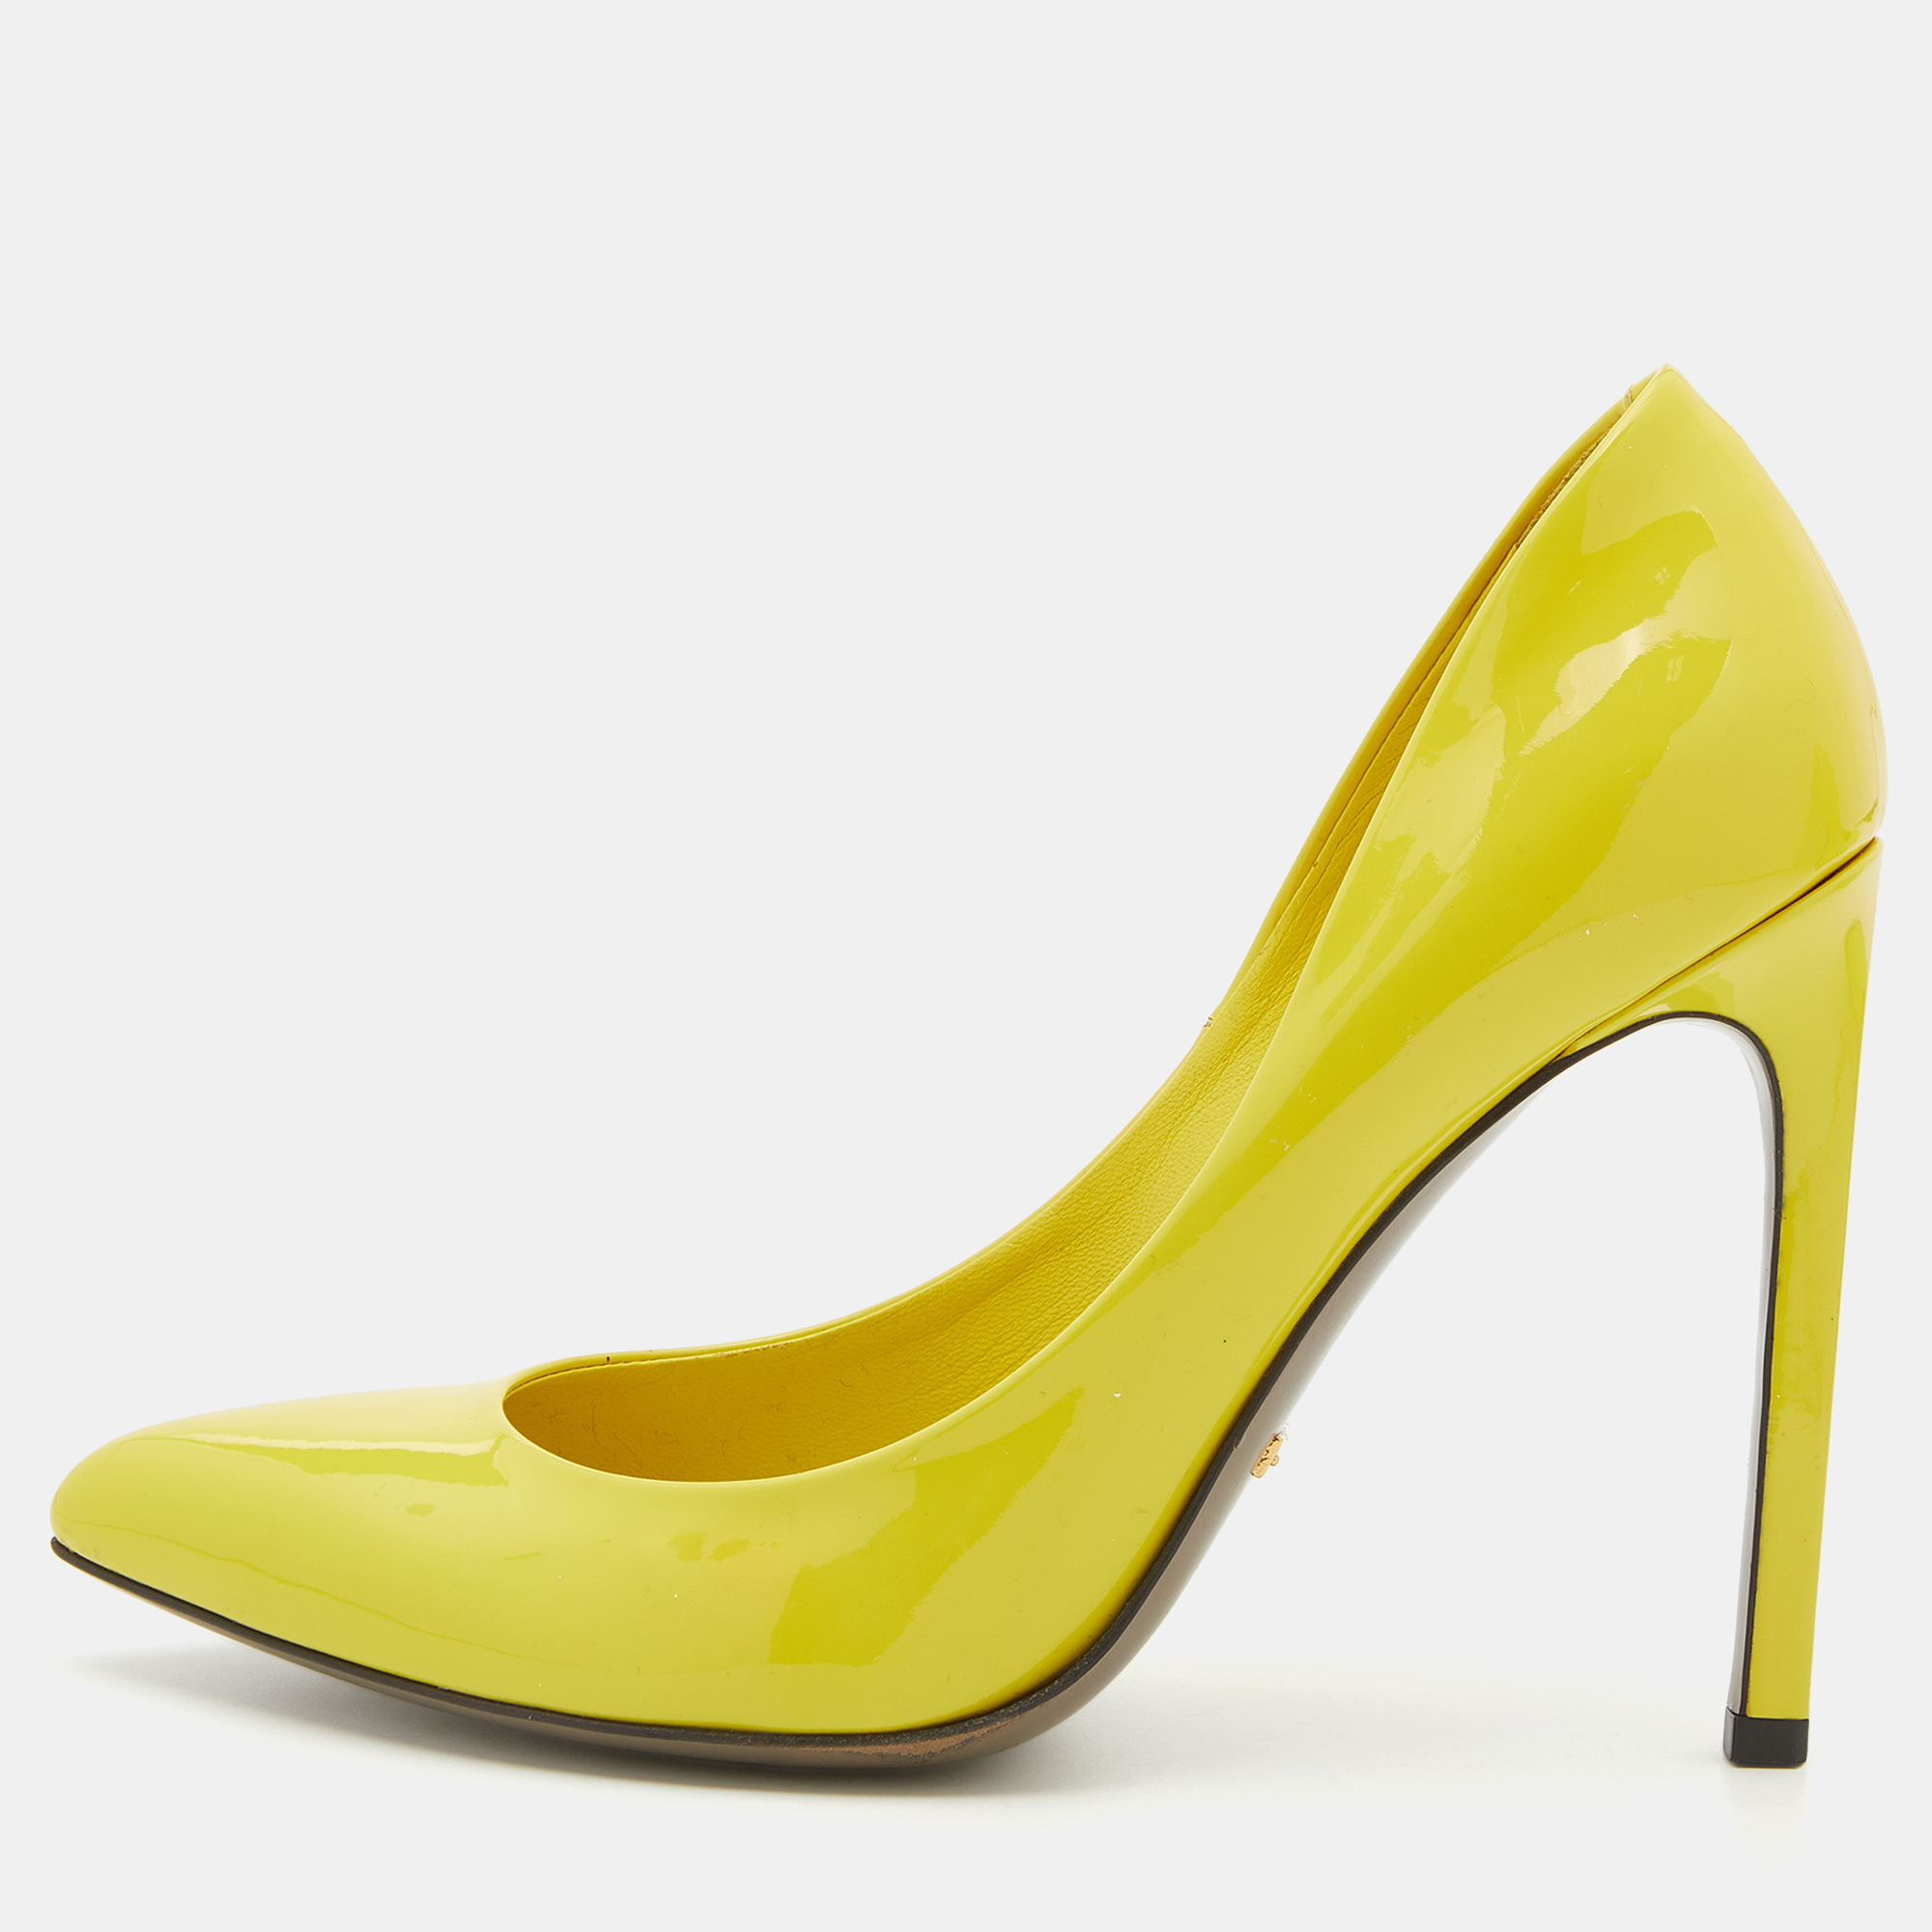 Pre-owned Gucci Bright Yellow Patent Leather Pointed Toe Pumps Size 37.5